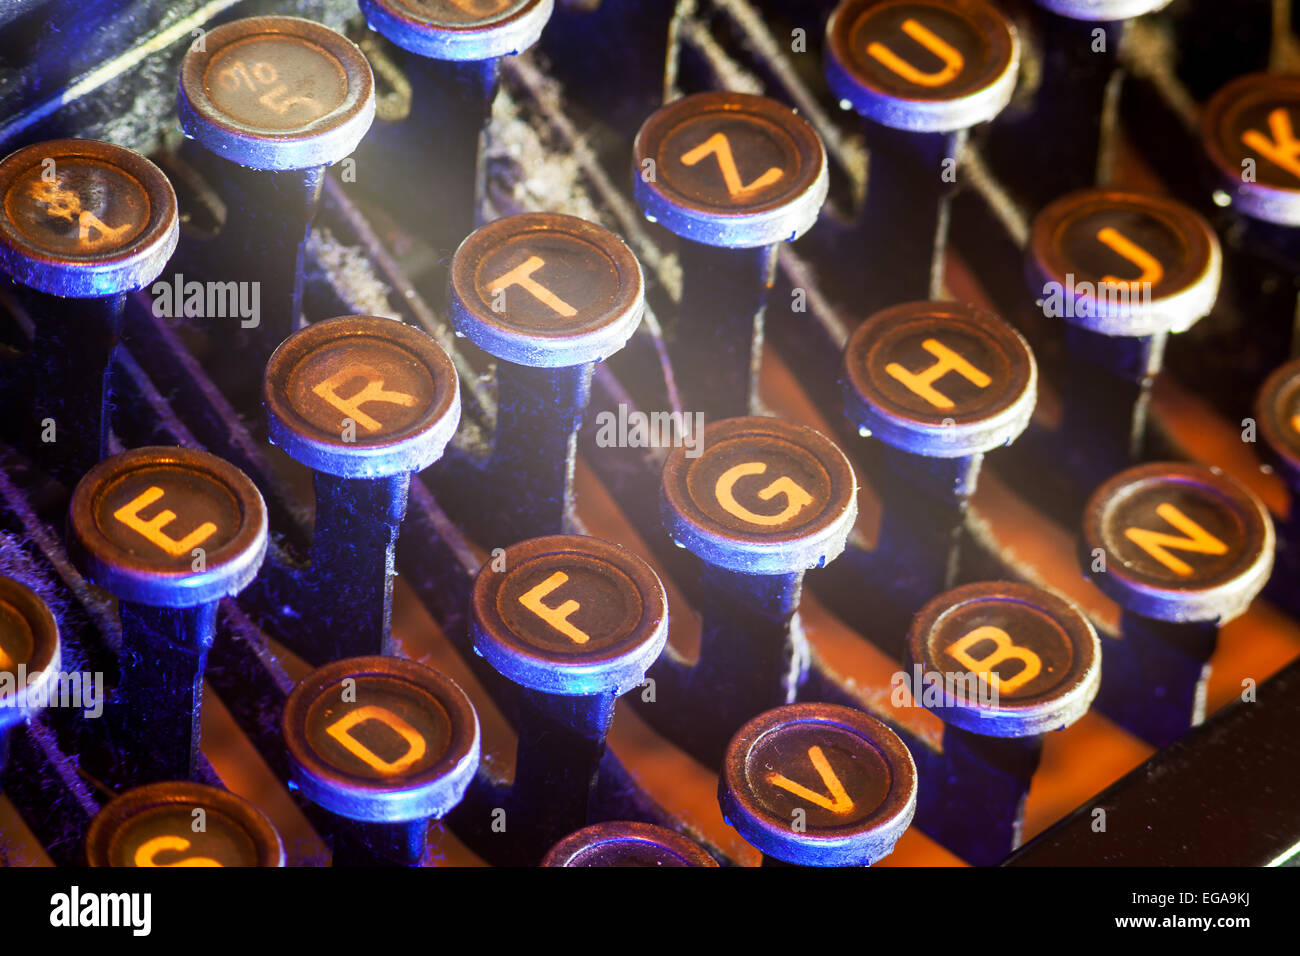 Details of an old vintage keyboard, part of an old vintage style typewriter. Stock Photo